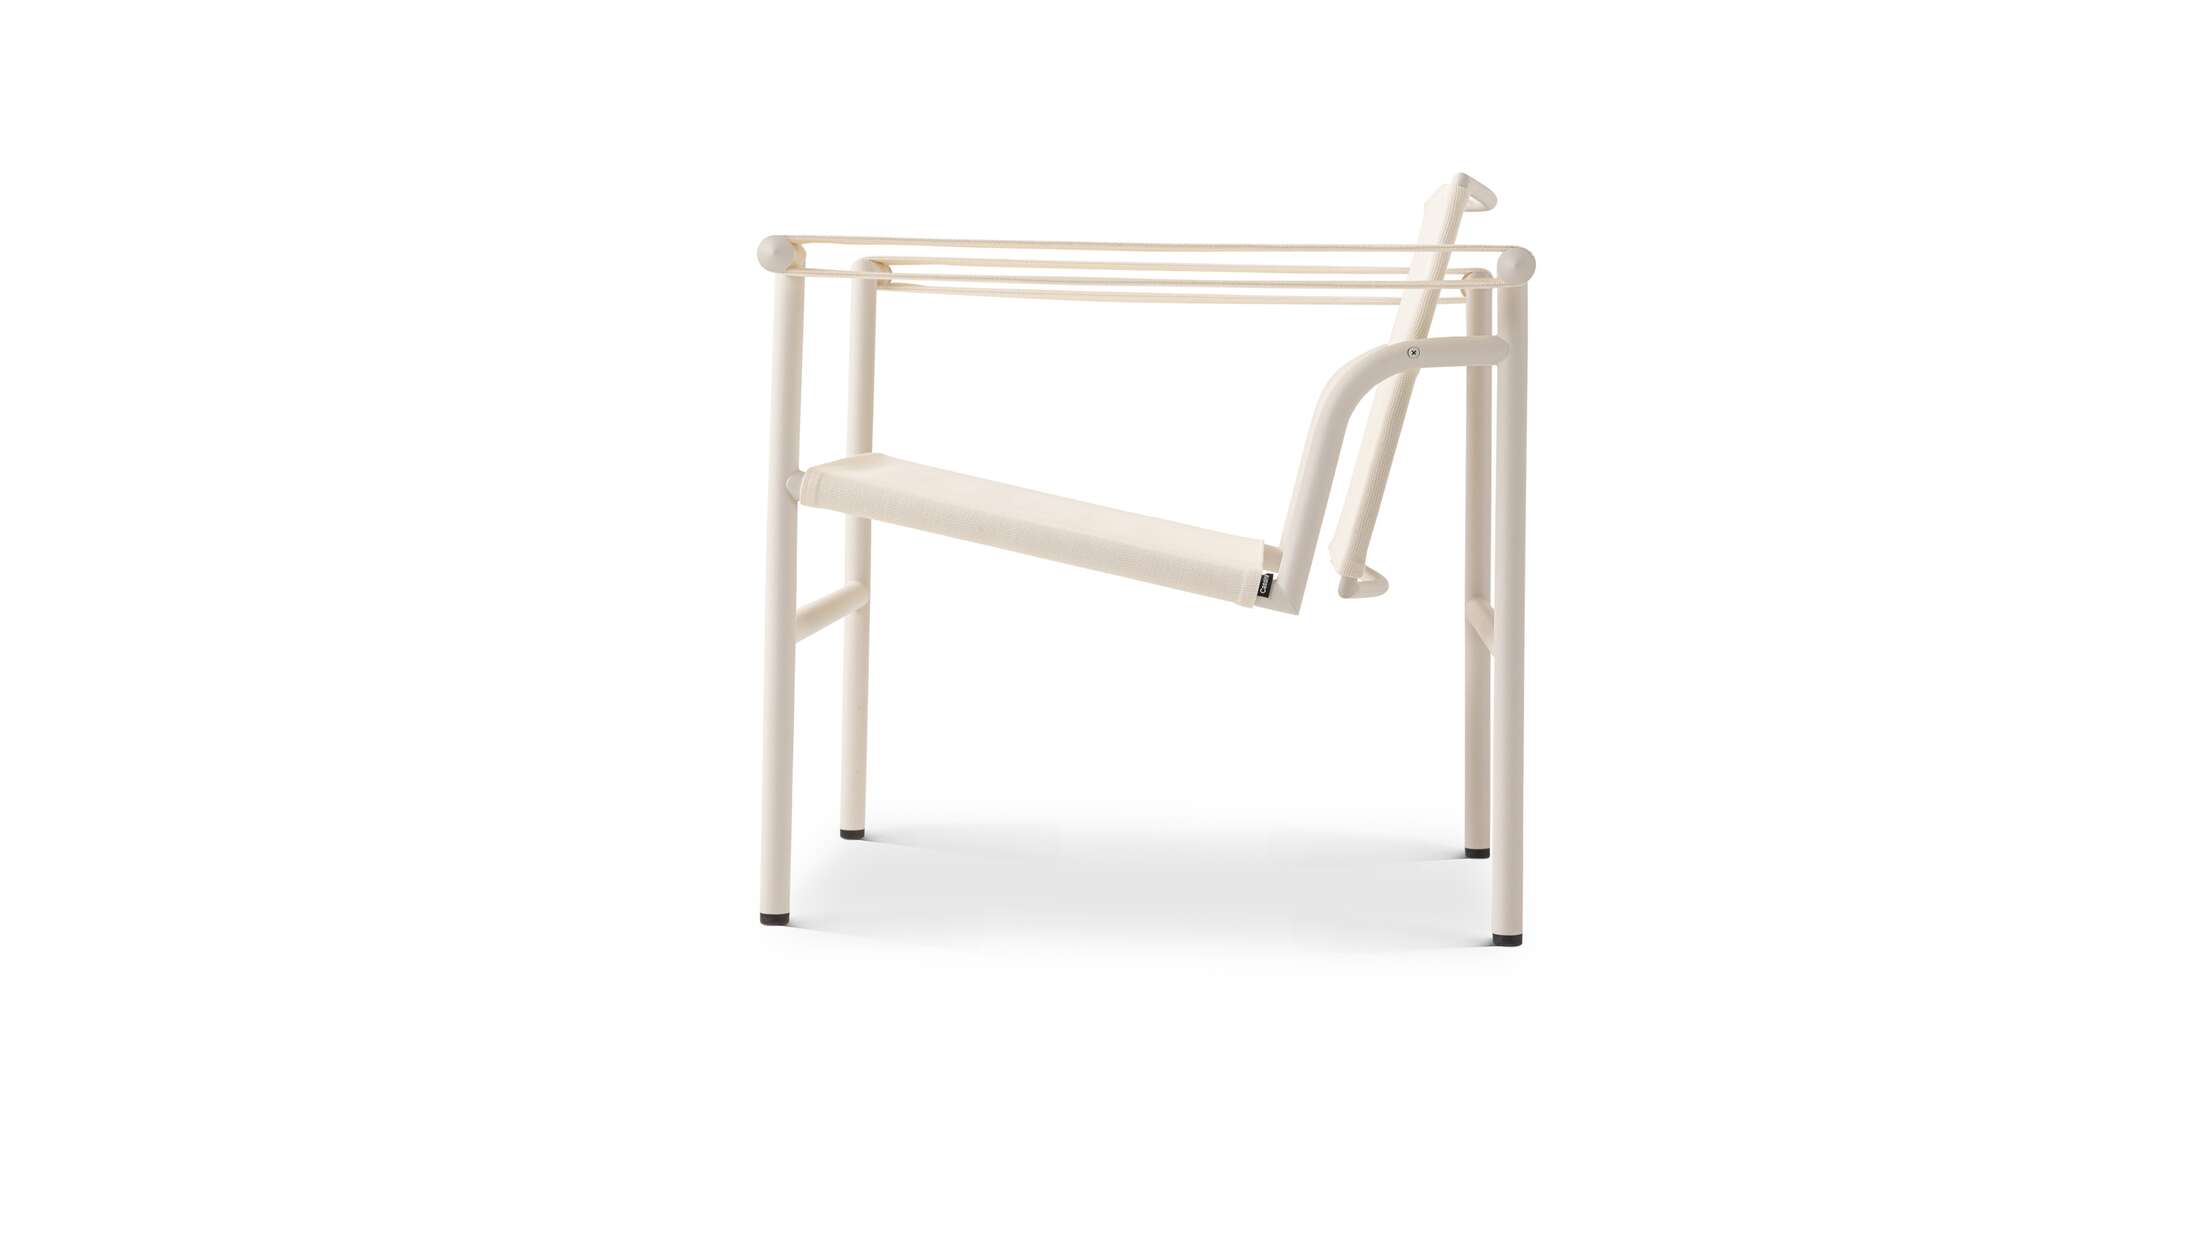 Prices vary dependent on the chosen color and finish. LC1 white Outdoor chair by Le Corbusier, Pierre Jeanneret, Charlotte Perriand in 1928. Relaunched in 1965. Manufactured by Cassina in Italy. 